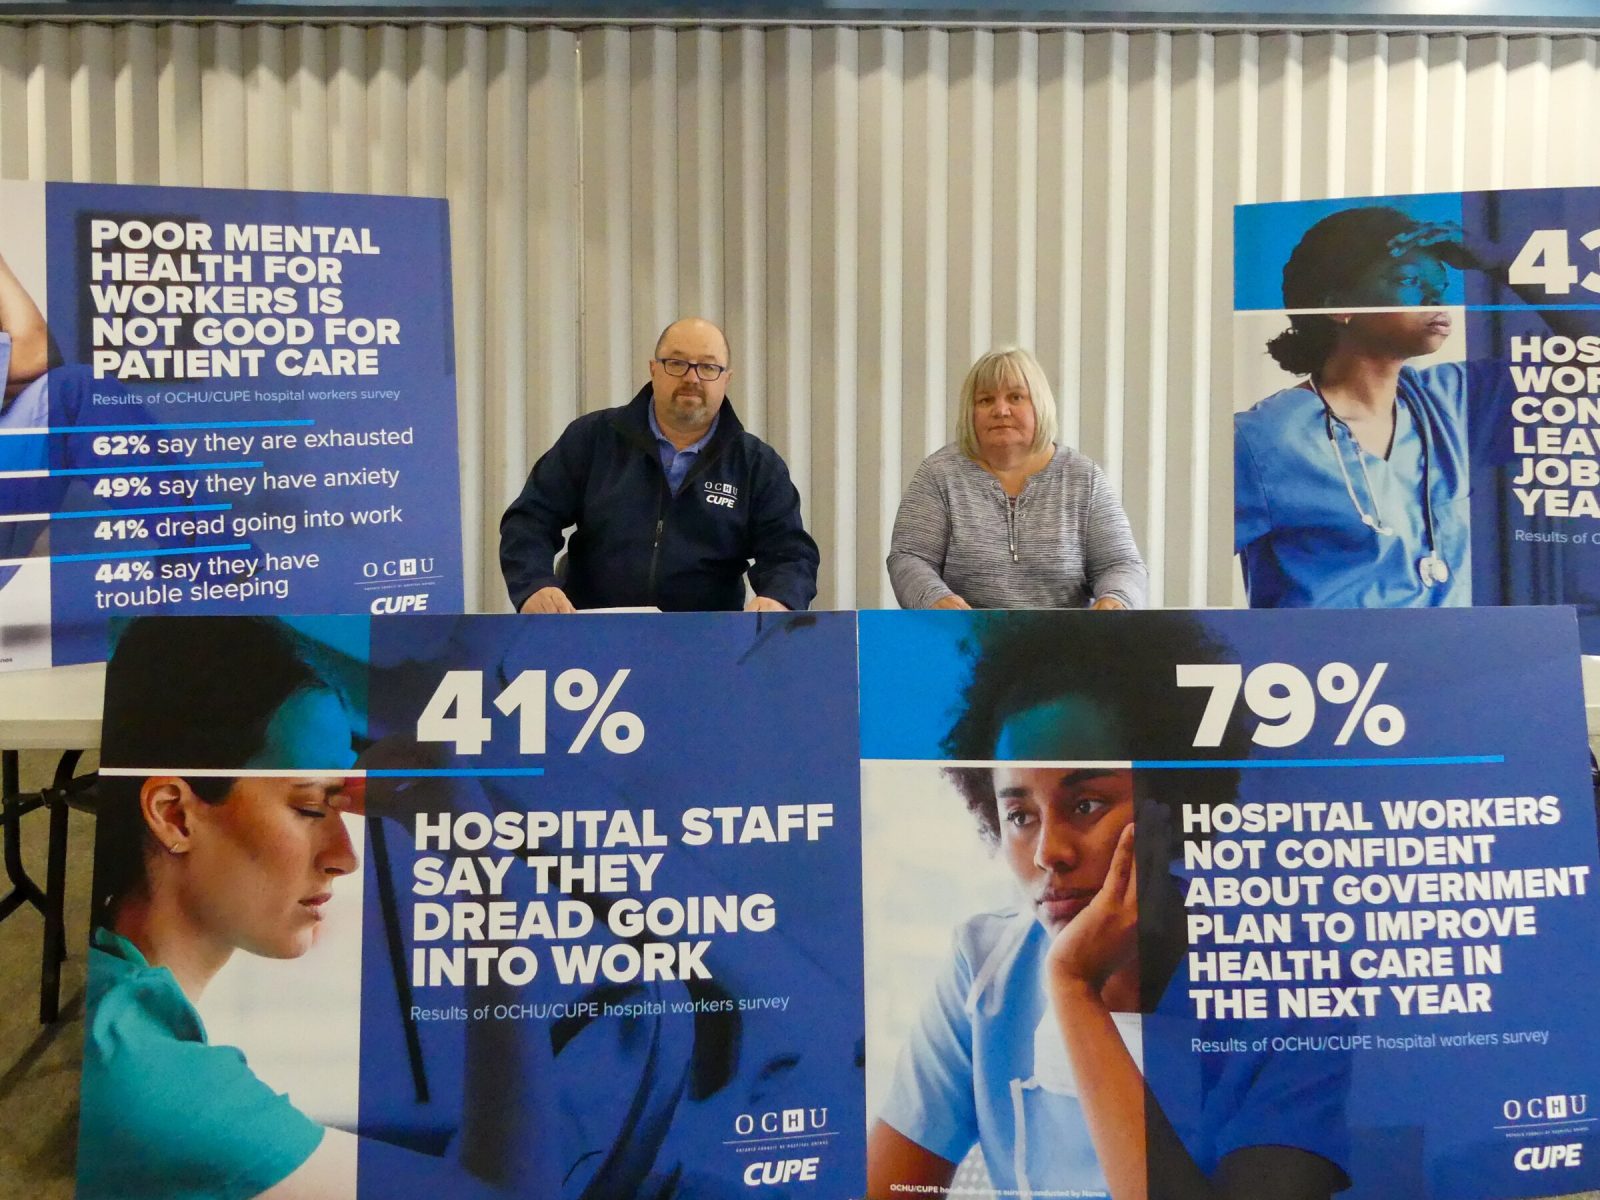 OCHU/CUPE report findings of a new poll of hospital staff across Ottawa Valley